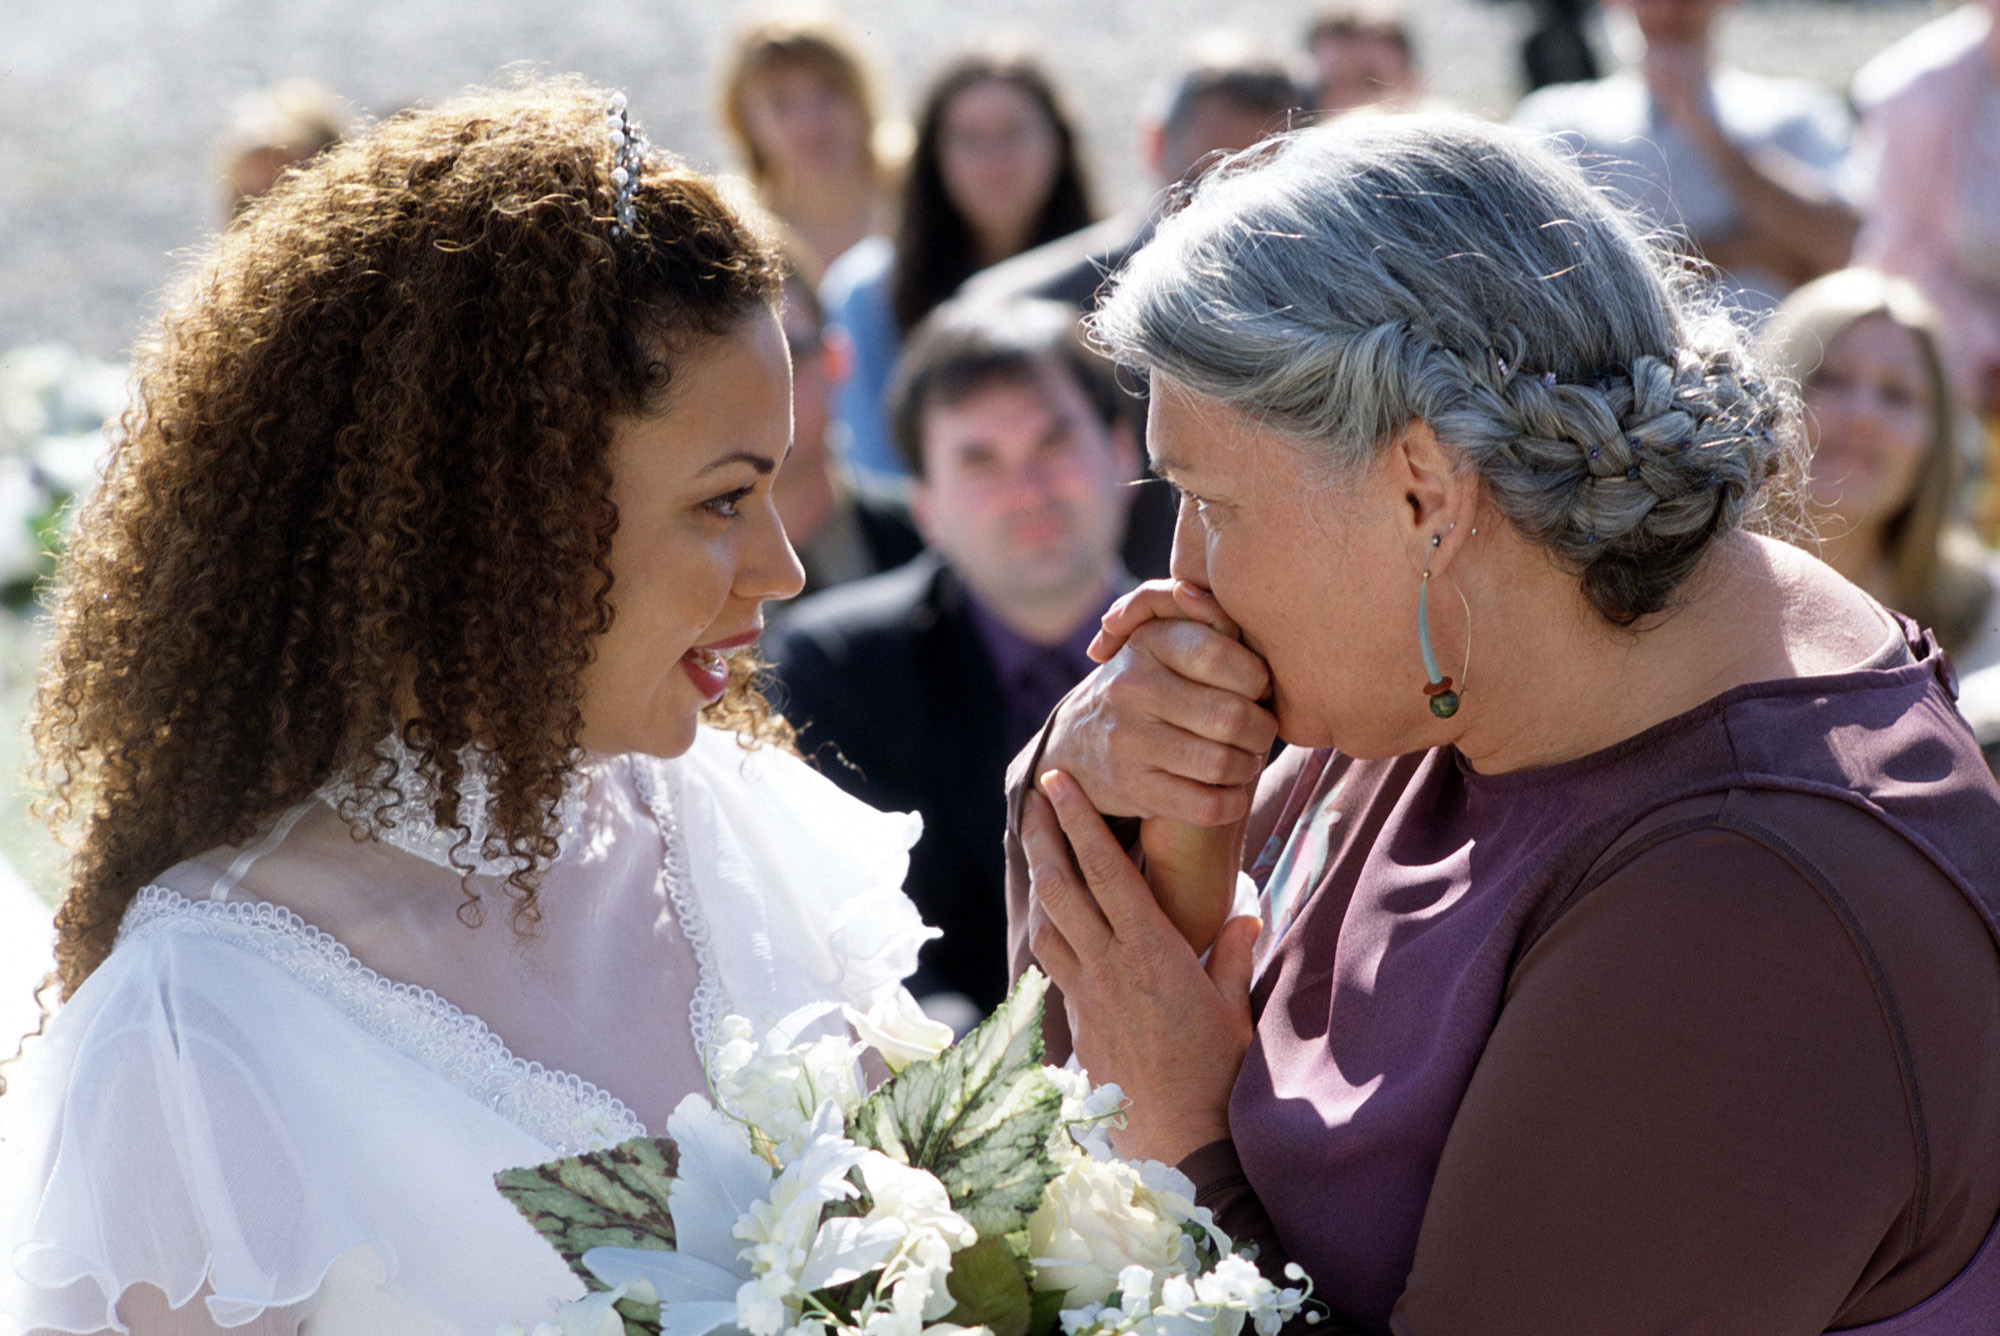 Kathryne Dora Brown and Tyne Daly starring in "The Wedding Dress," which was broadcast on October 28, 2001. | Source: Getty Images